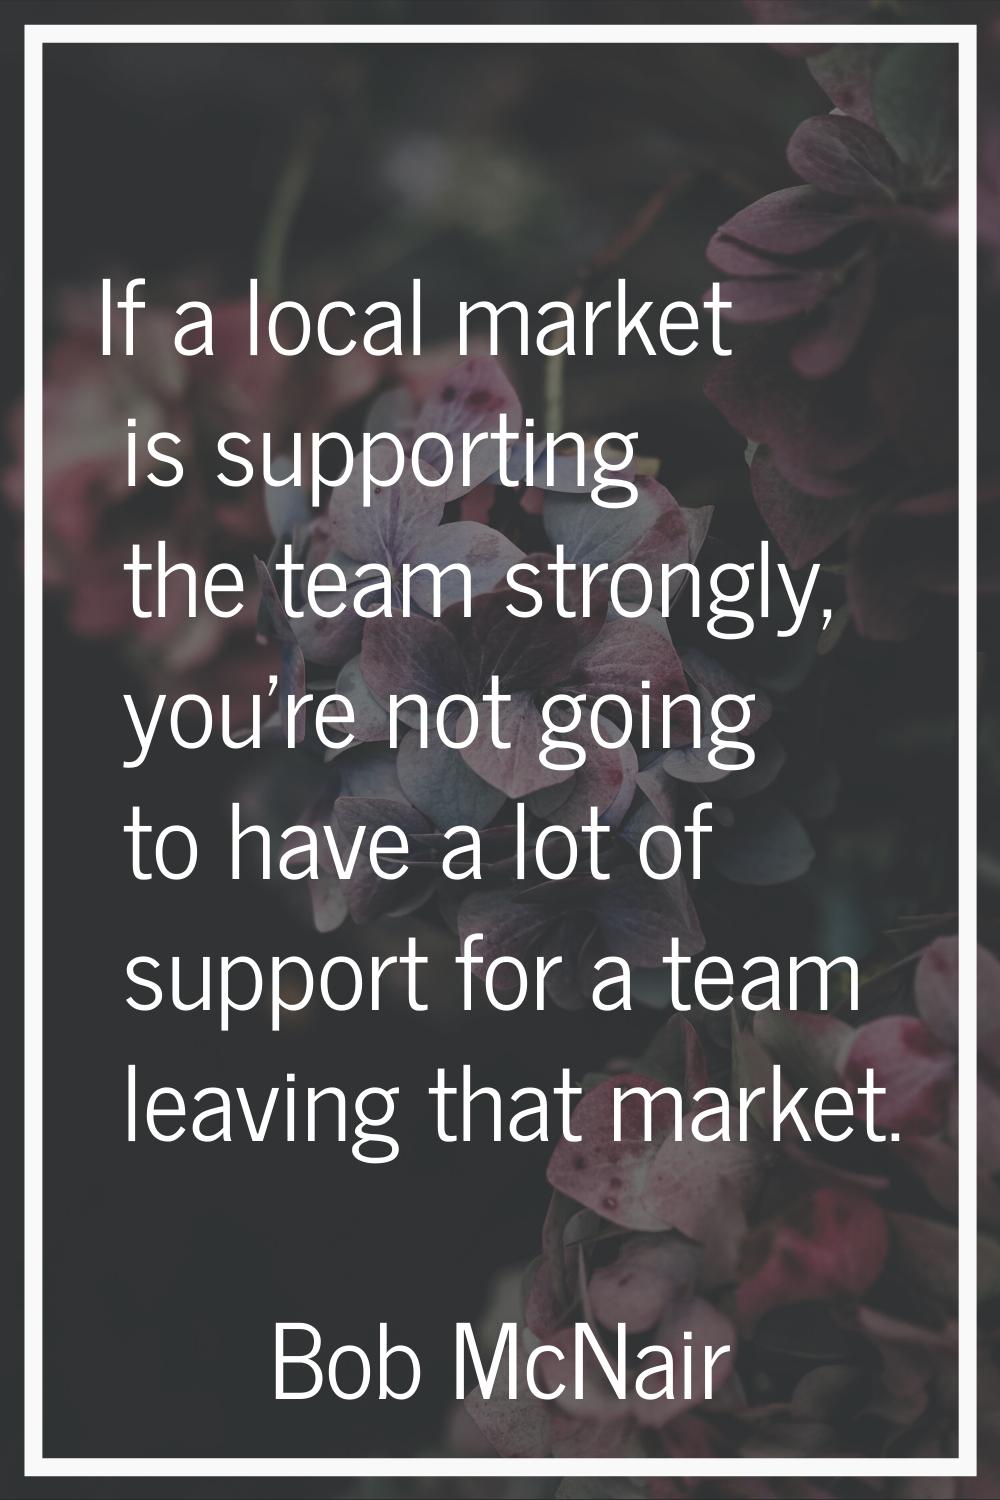 If a local market is supporting the team strongly, you're not going to have a lot of support for a 